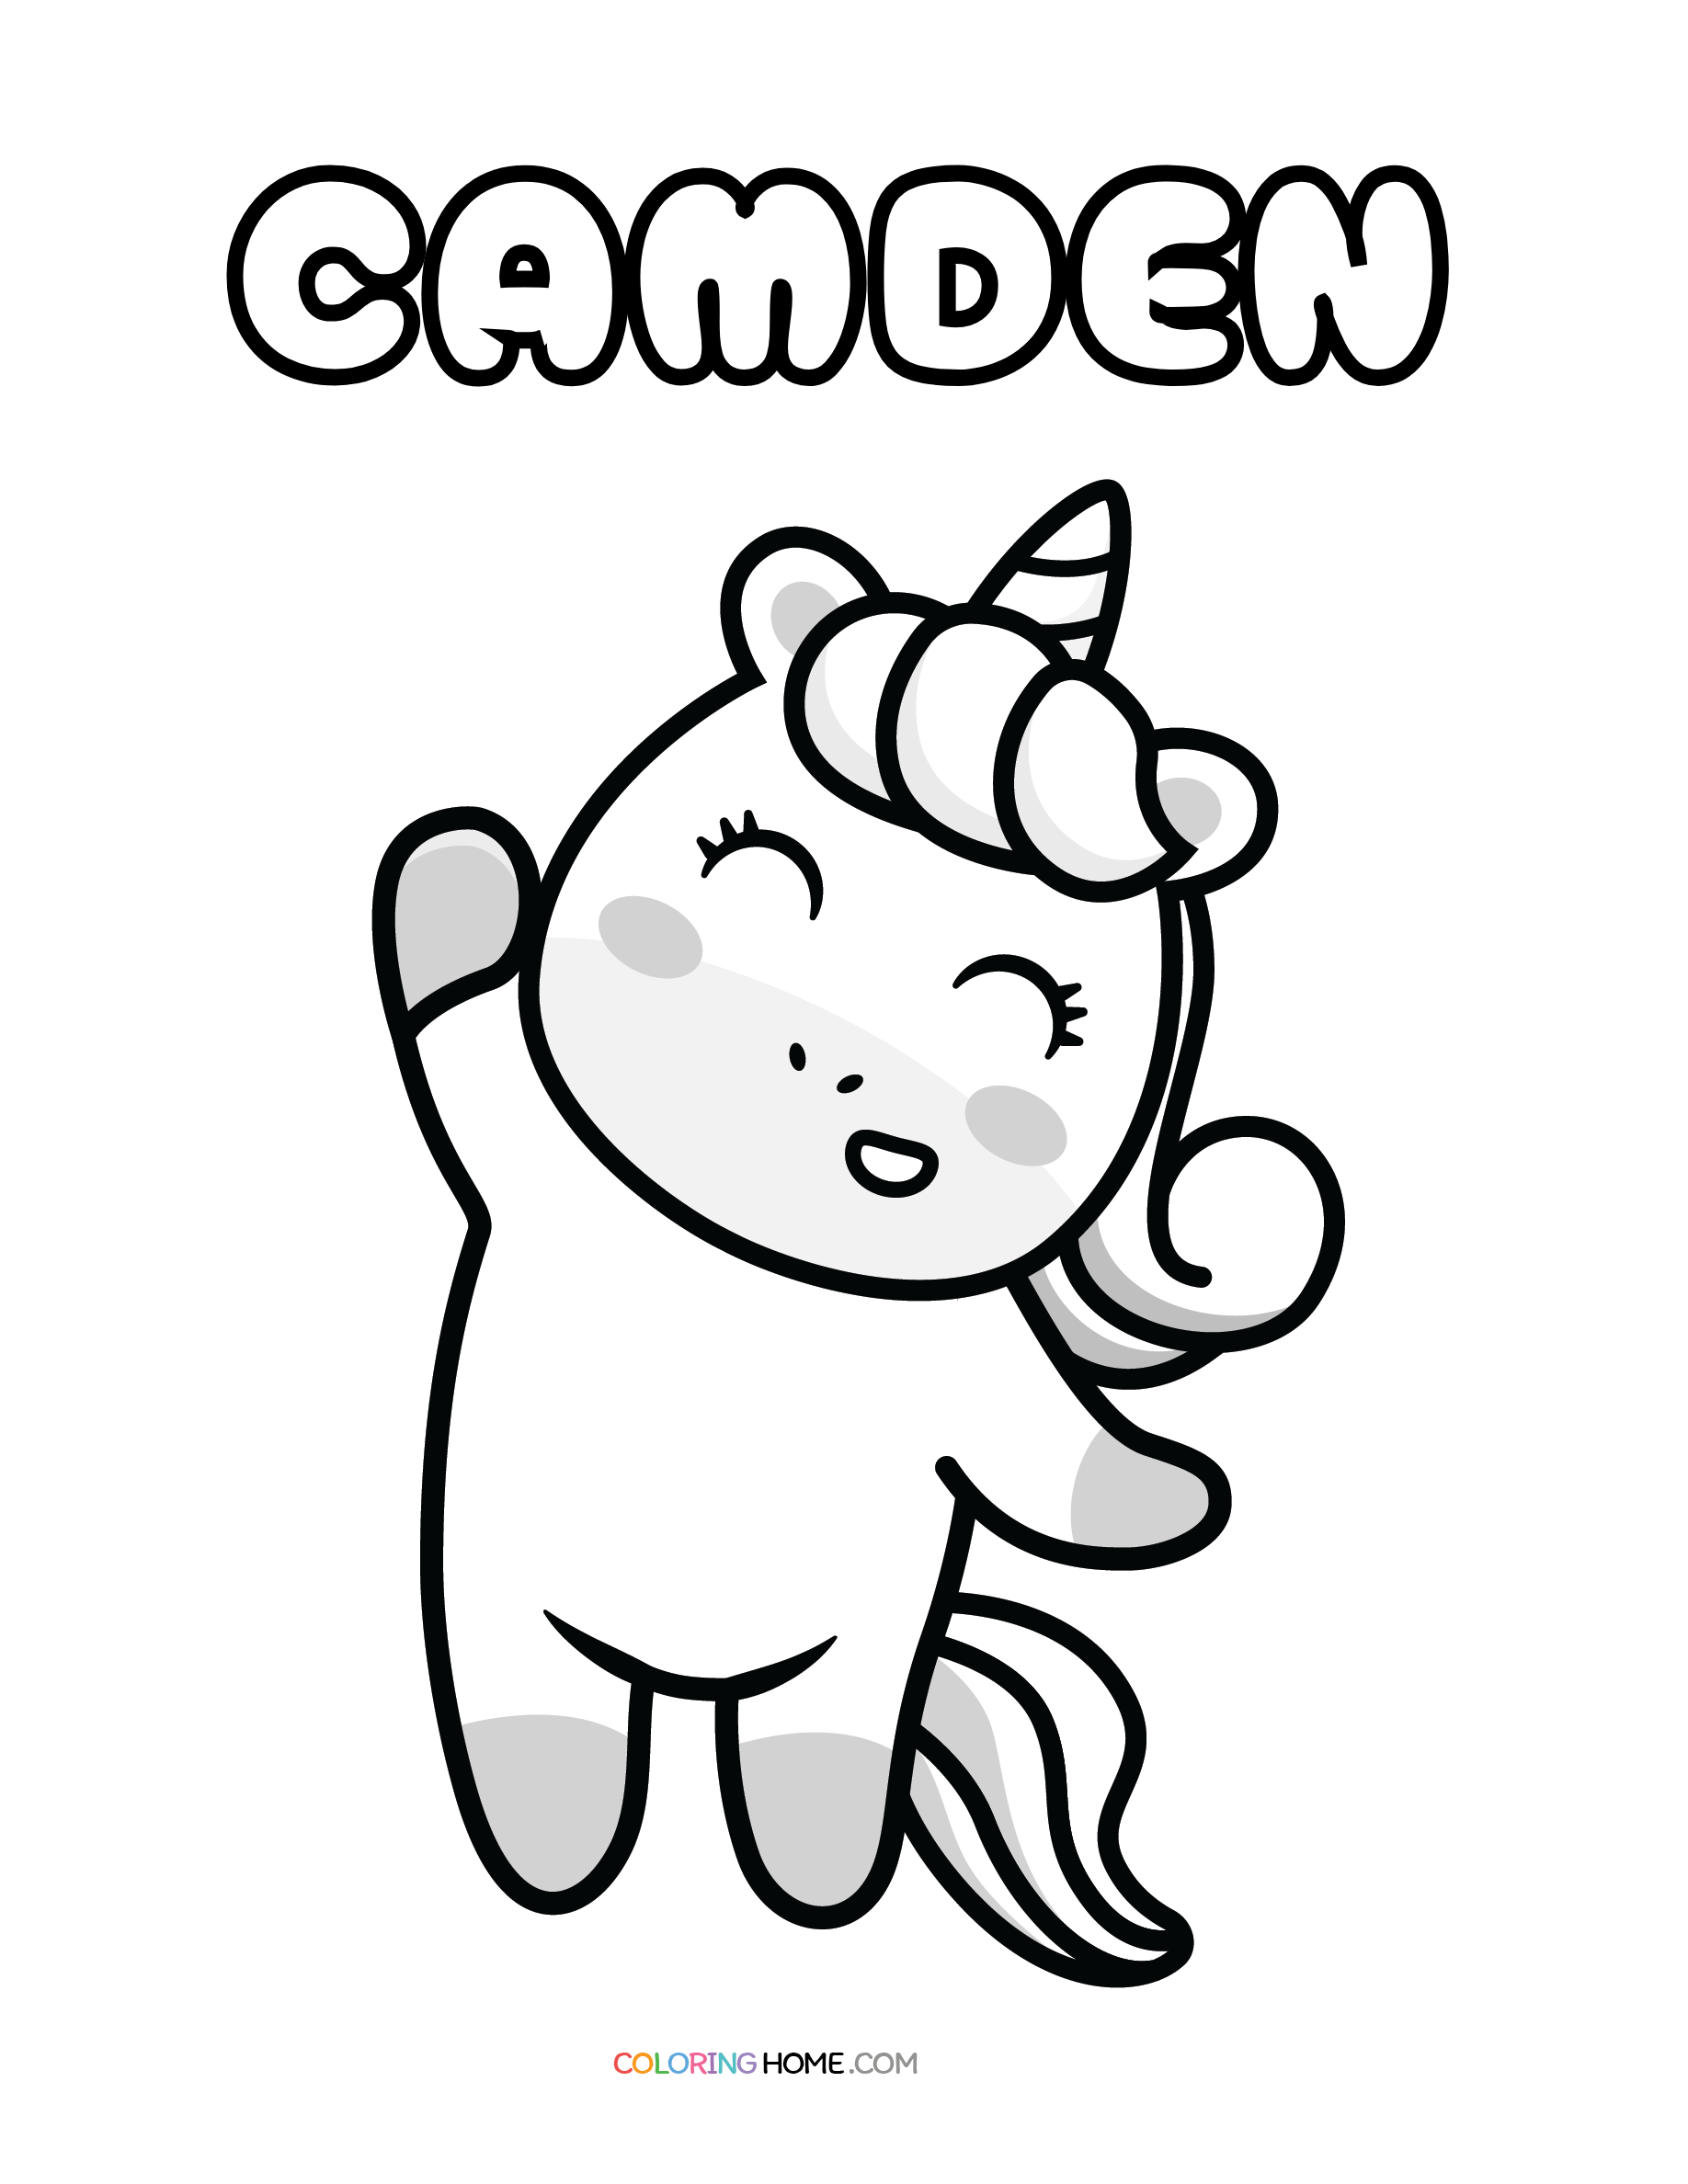 Camden unicorn coloring page